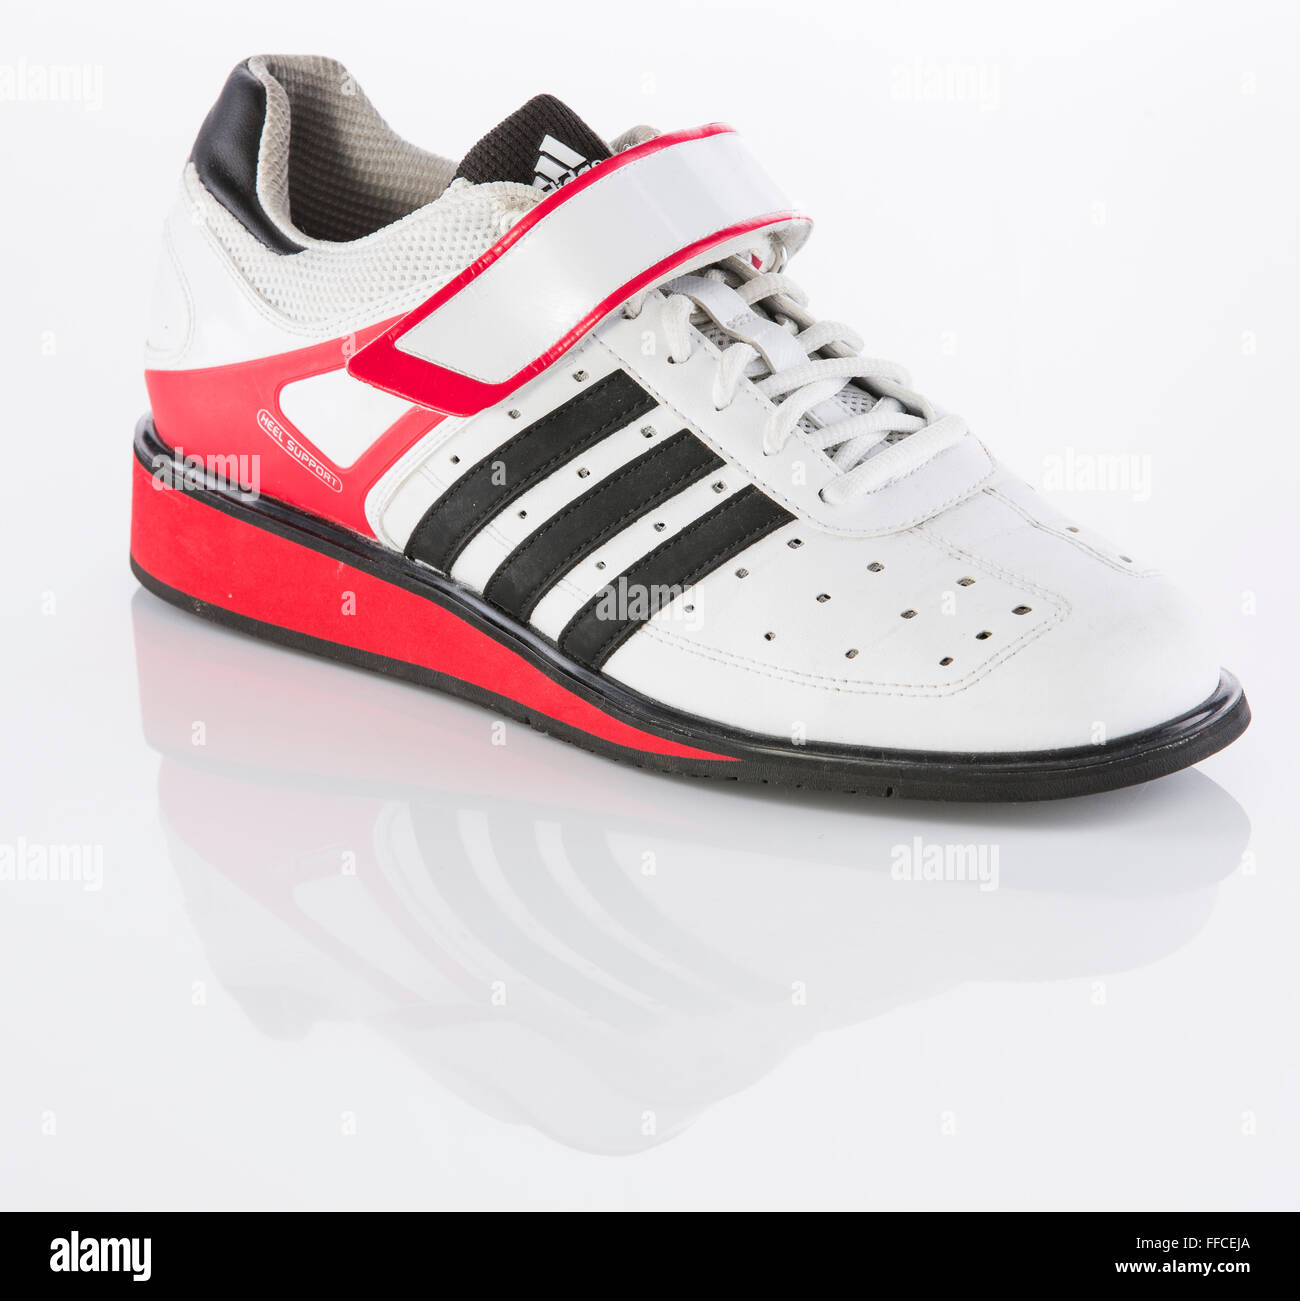 Adidas Olympic weightlifting shoes on a white background with a reflection  Stock Photo - Alamy